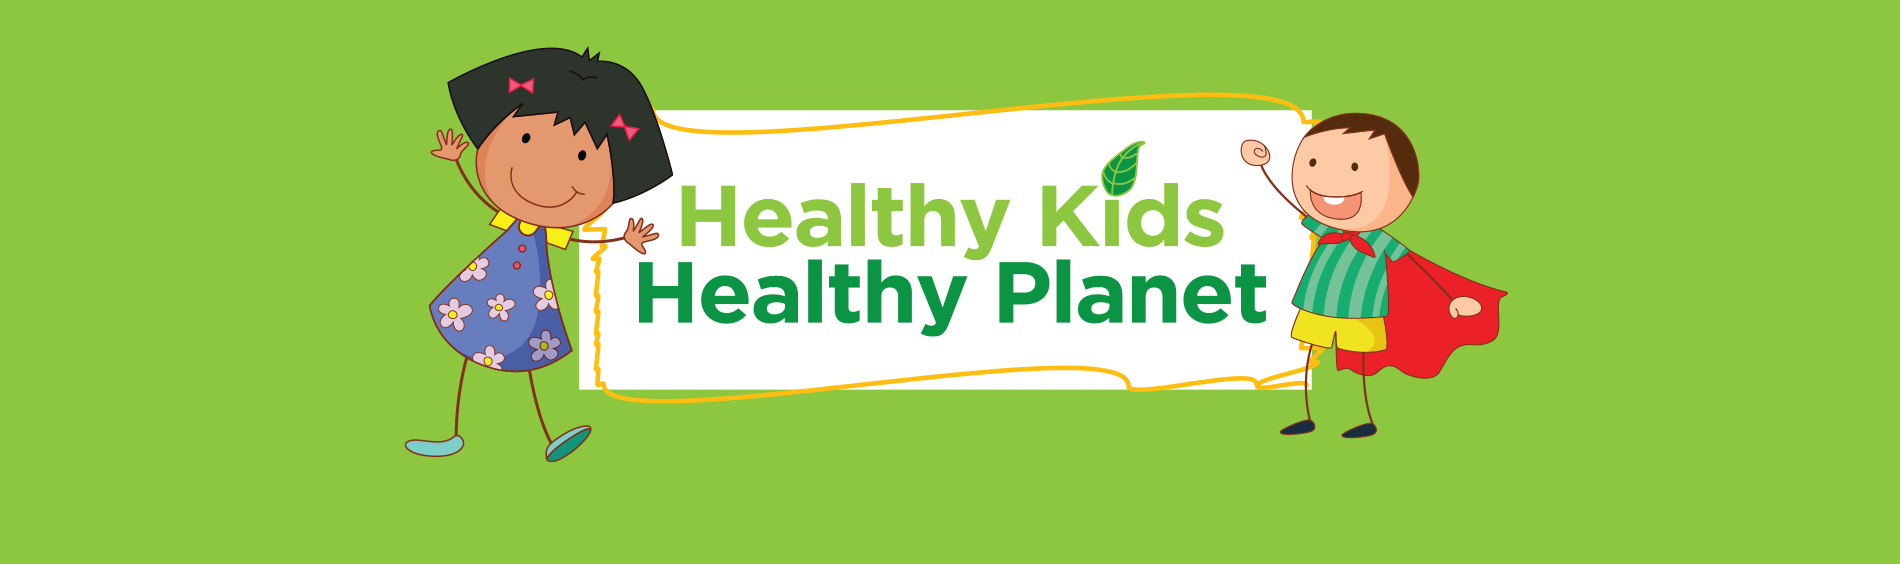 Healthy Kids Healthy Planet